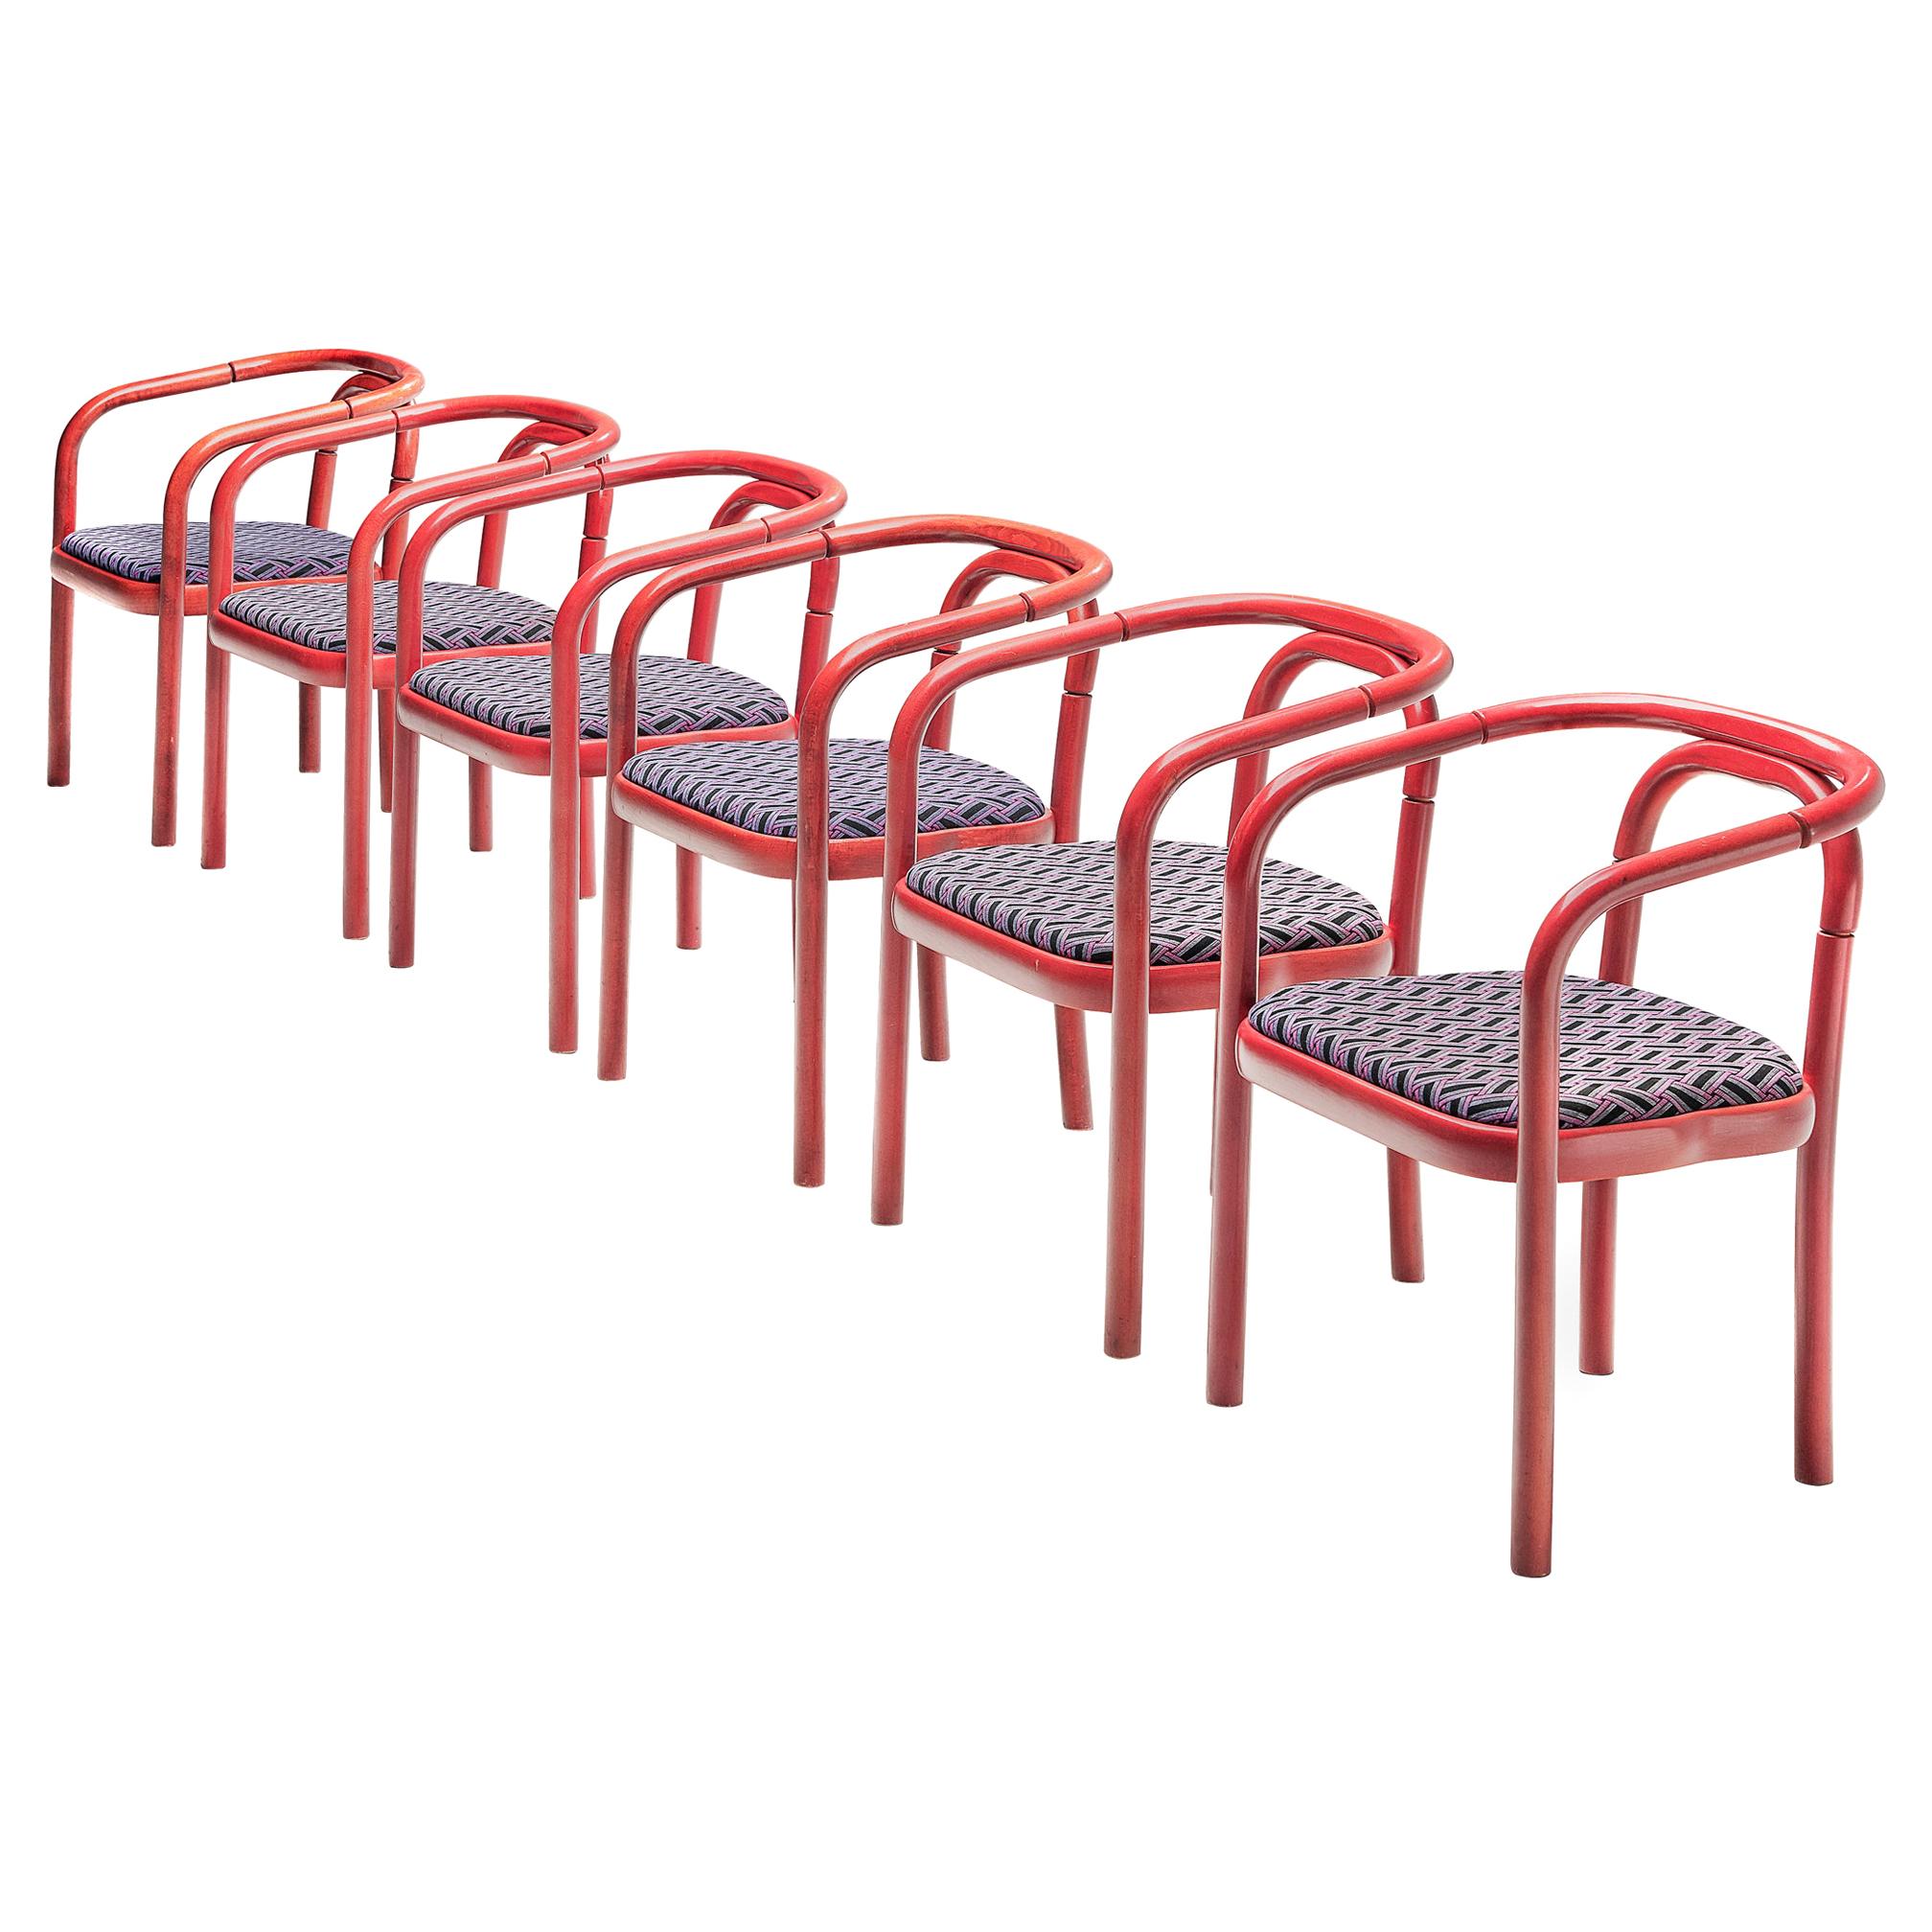 Large set of +75 Ton Chairs with Red Wooden Frames